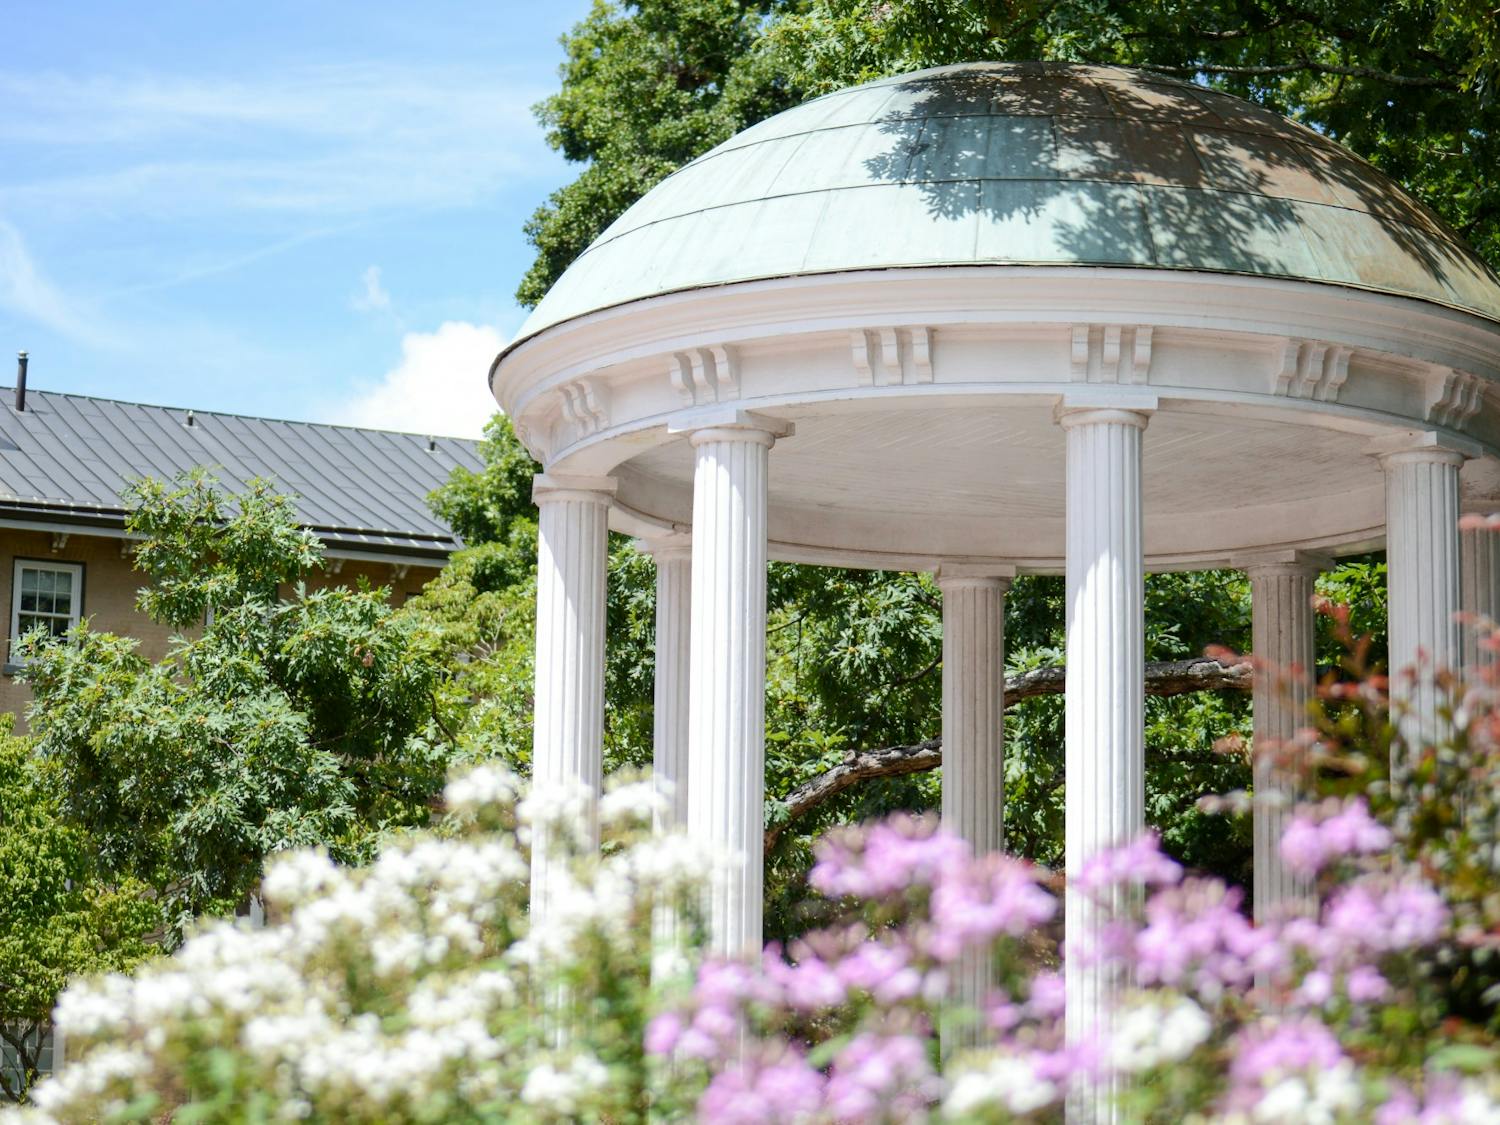 The Old Well, complimented by late summer flora, stands tall on August 7, 2022. UNC's Class of 2026 makes their way on campus, guided by the advice and actions of upperclassmen.